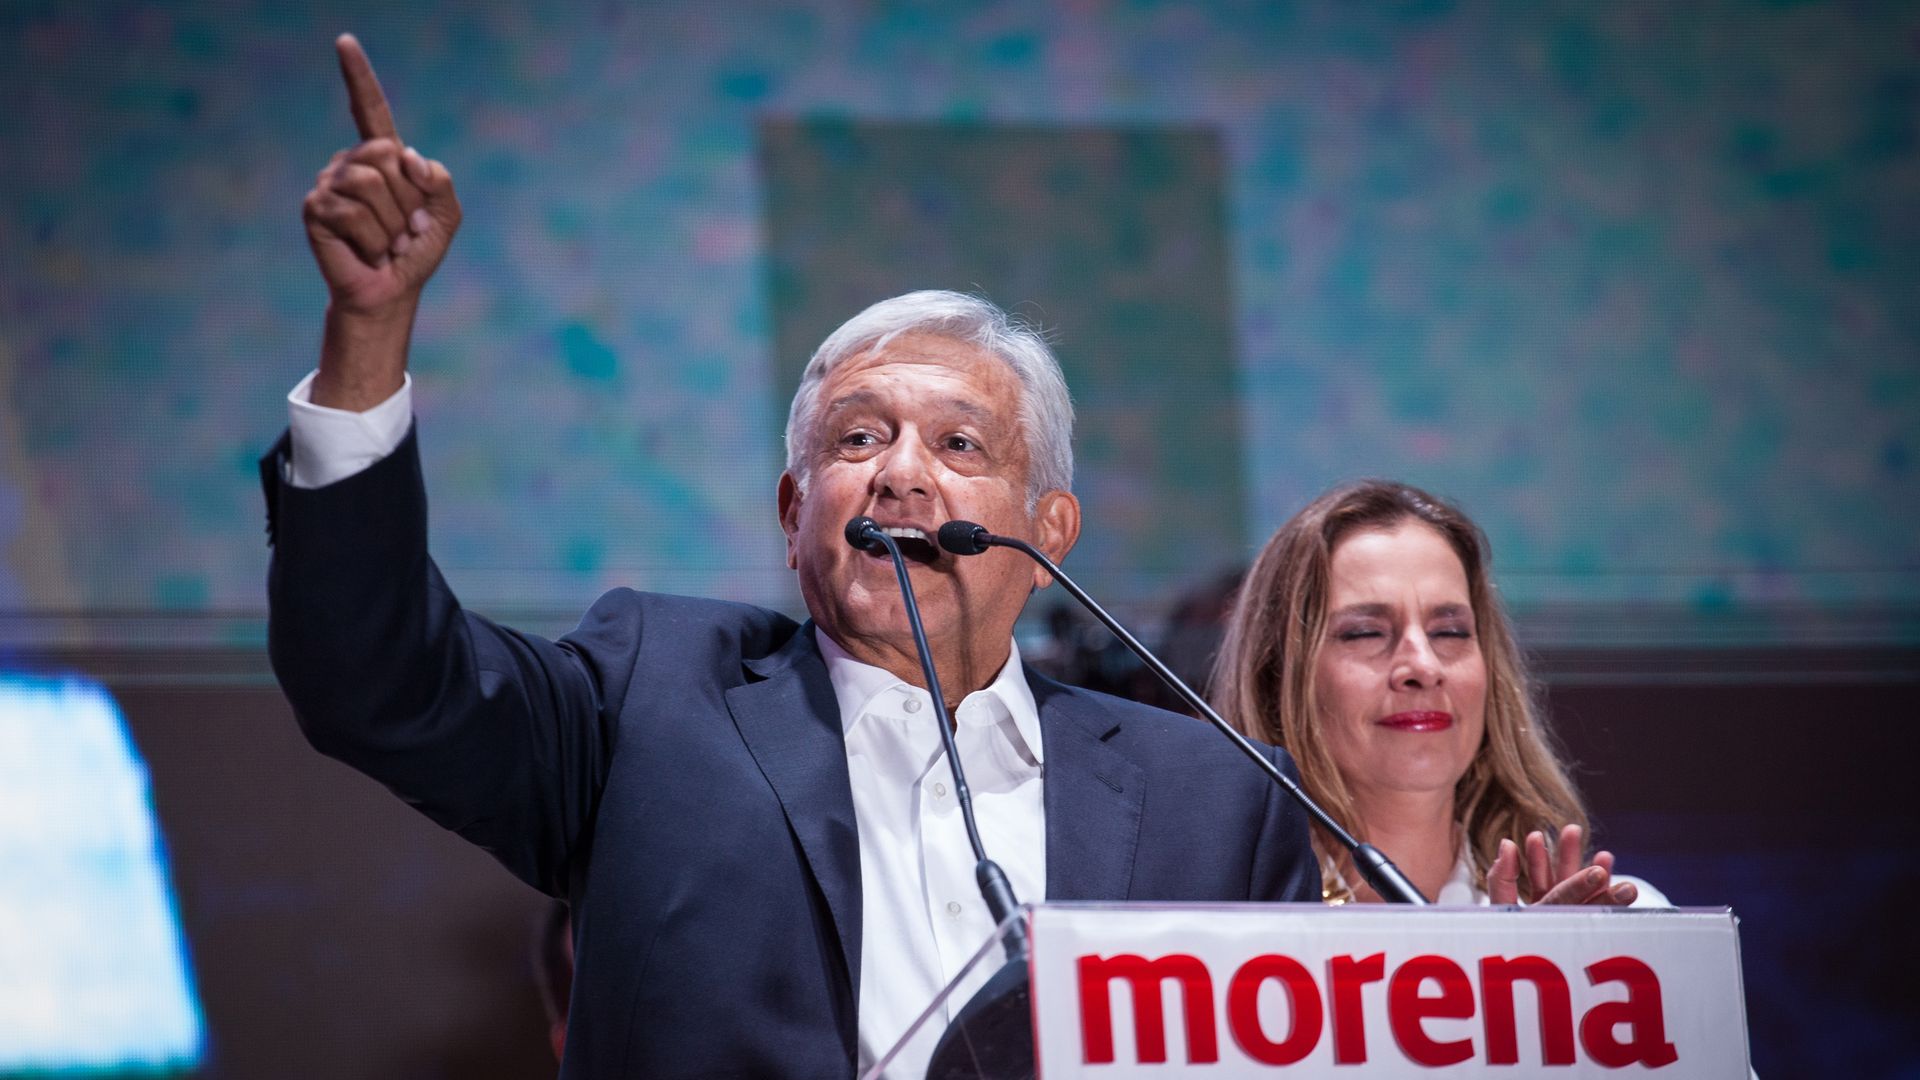 President elect of Mexico, Andres Manuel Lopez Obrador speaks during the celebration event, at the end of the Mexico 2018 Presidential Election on July 1, 2018 in Mexico City, Mexico.